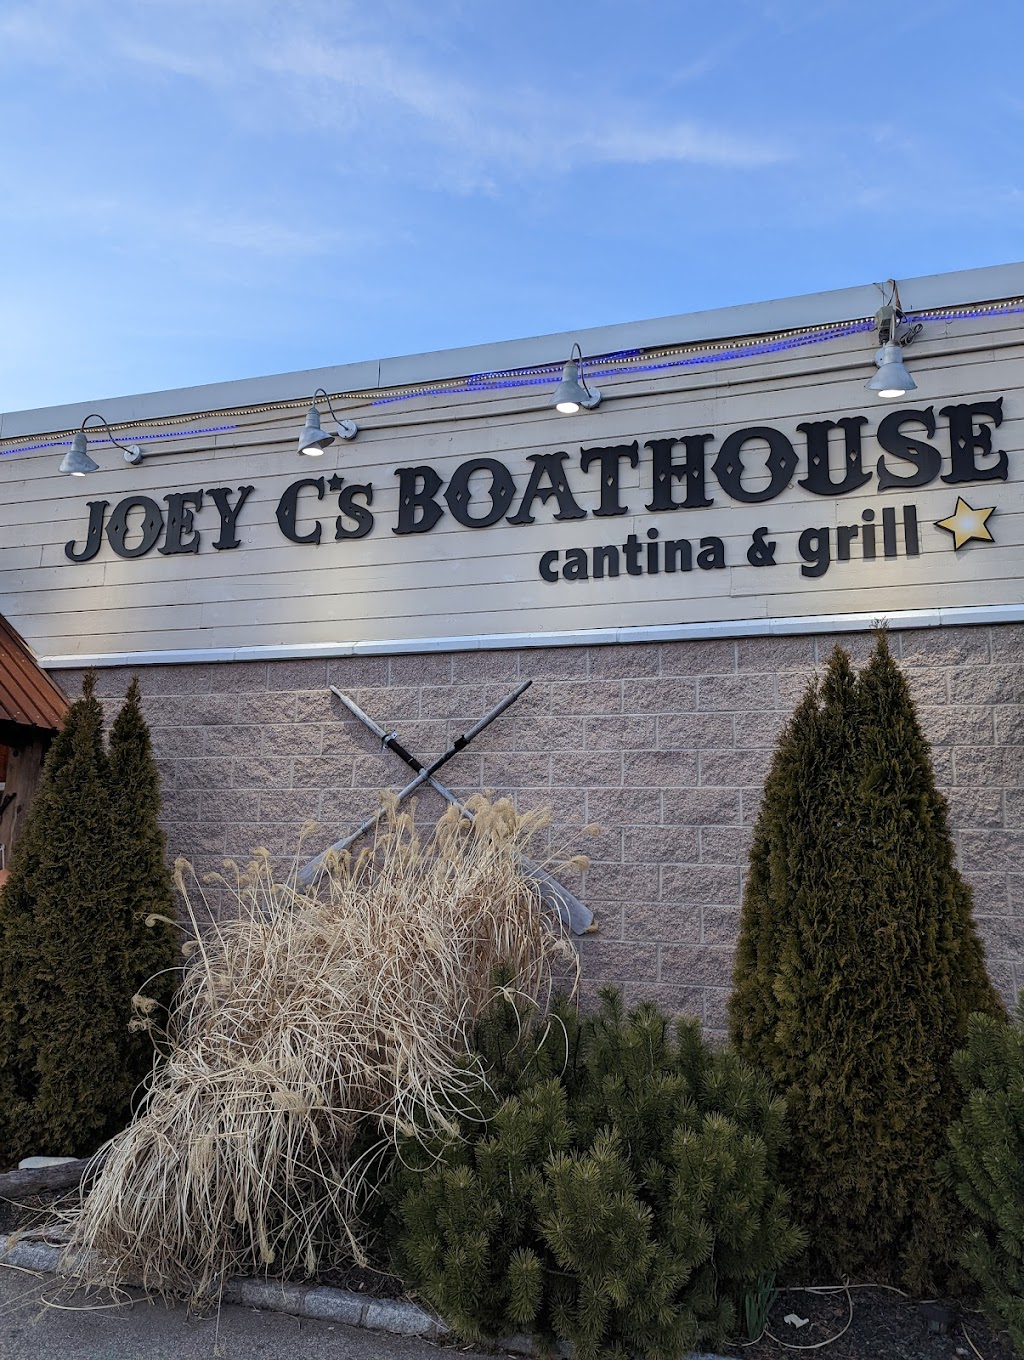 Joey Cs Boathouse Cantina & Grill | 955 Ferry Blvd, Stratford, CT 06614 | Phone: (203) 870-4838